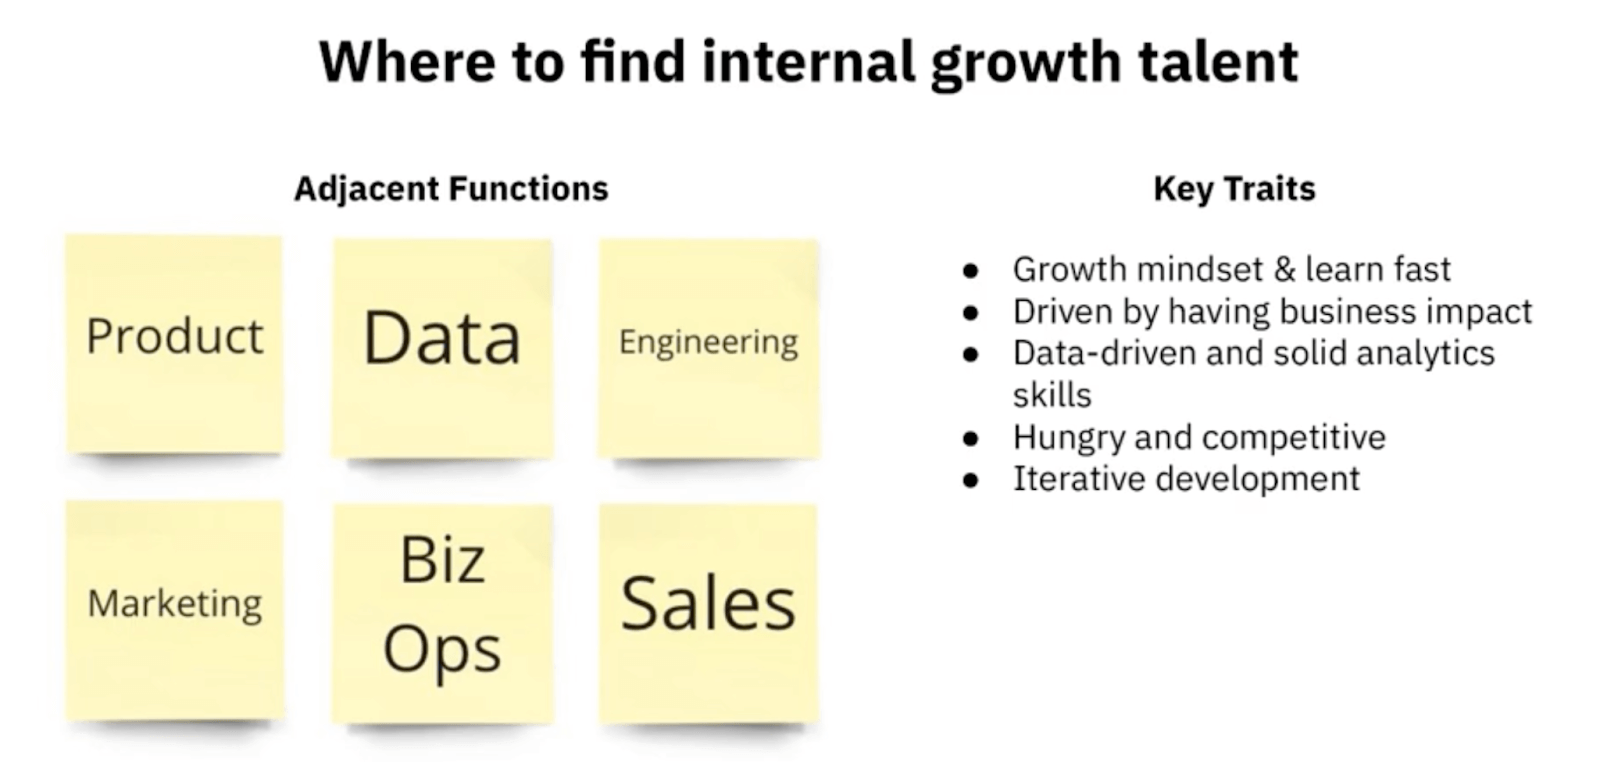 Where to find internal growth talent notes